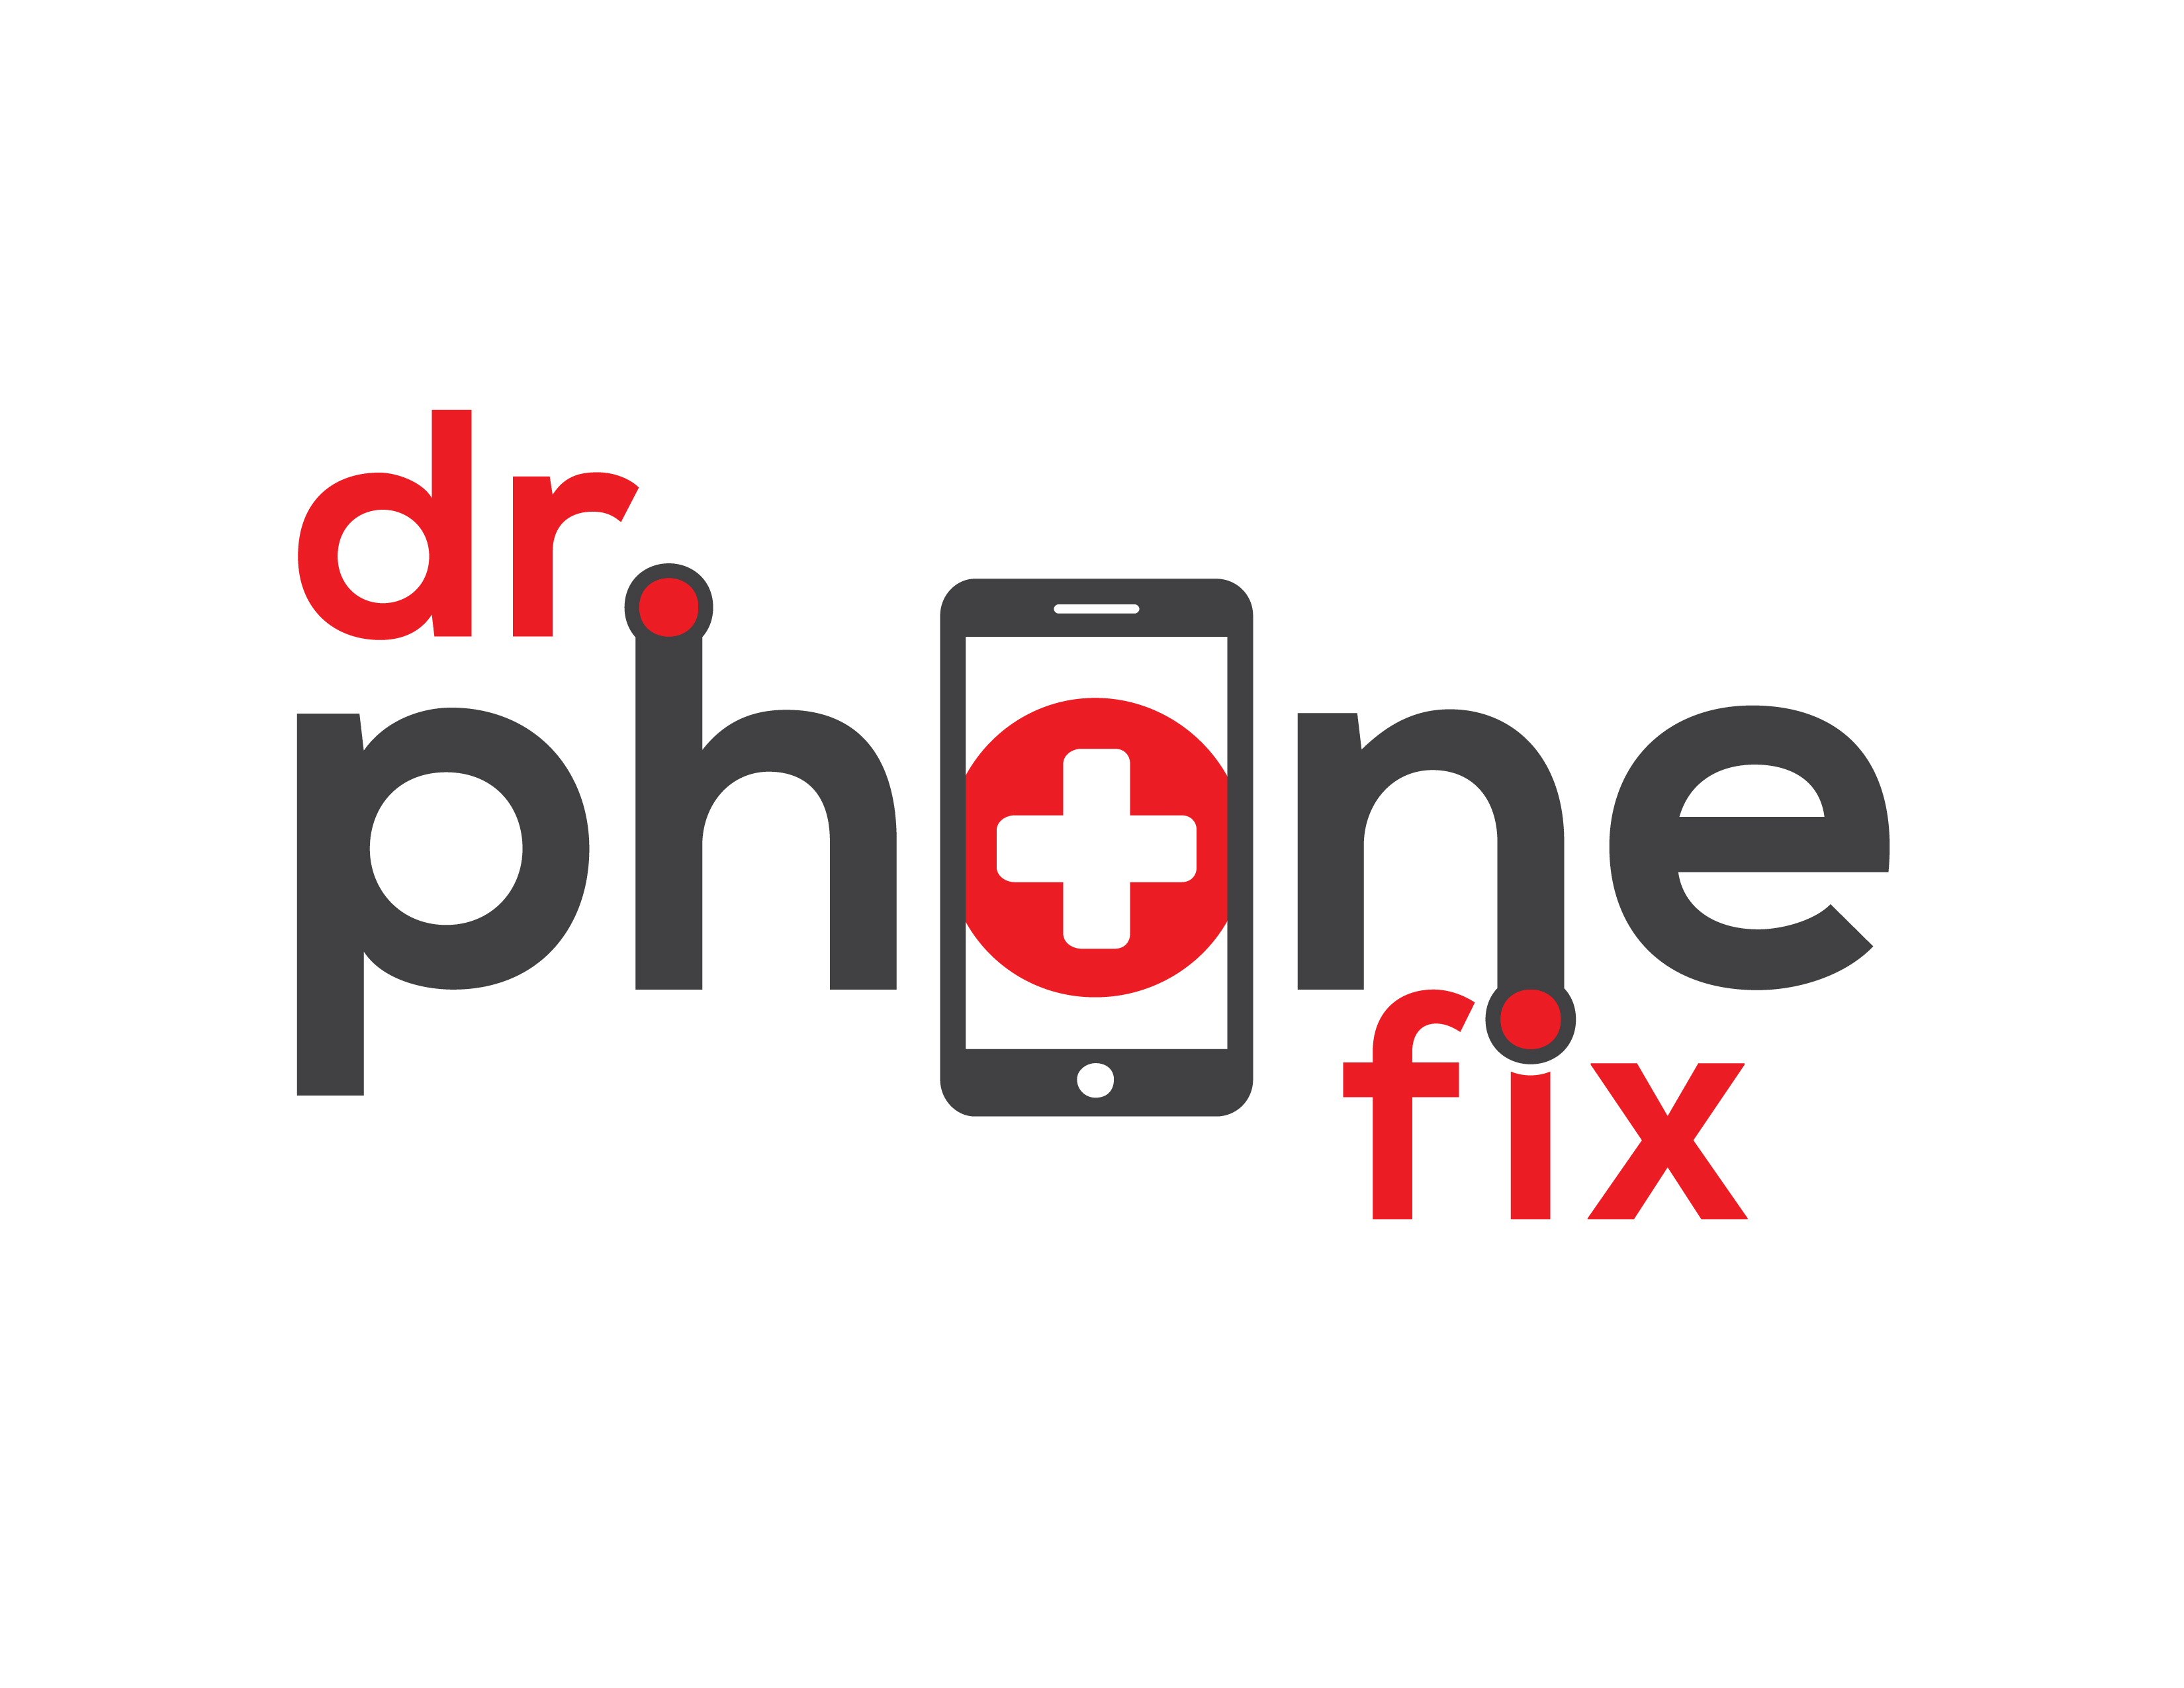 SASKATOON BUSINESS LEADER JOINS IN GRAND OPENING OF TWO DR PHONE FIX STORES